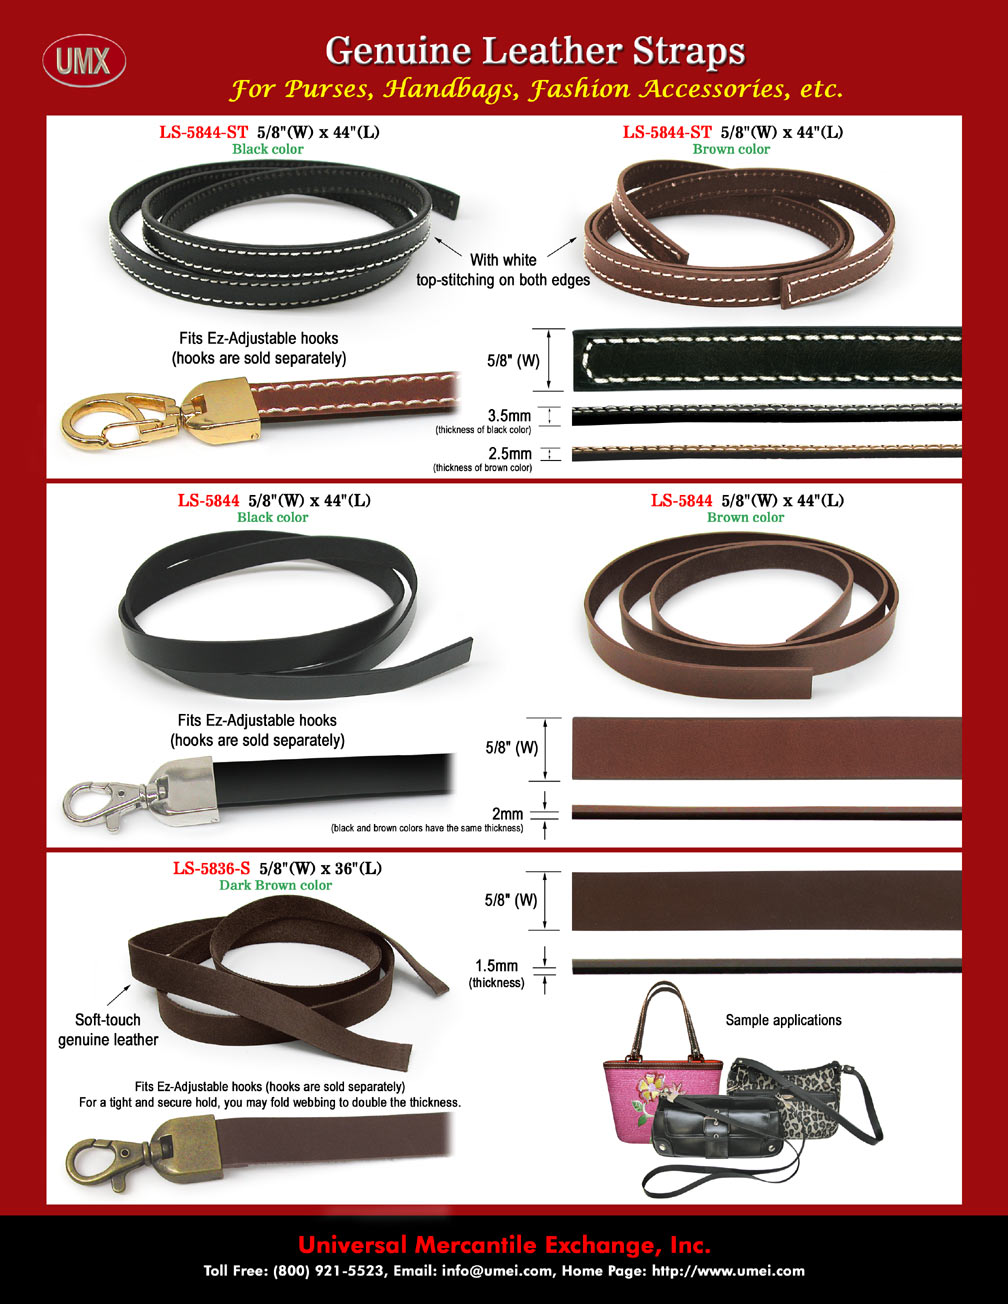 UMX Genuine Leather Straps: Fashion Strap Designed For Shoulder Bags or  Hand Carry Bags.